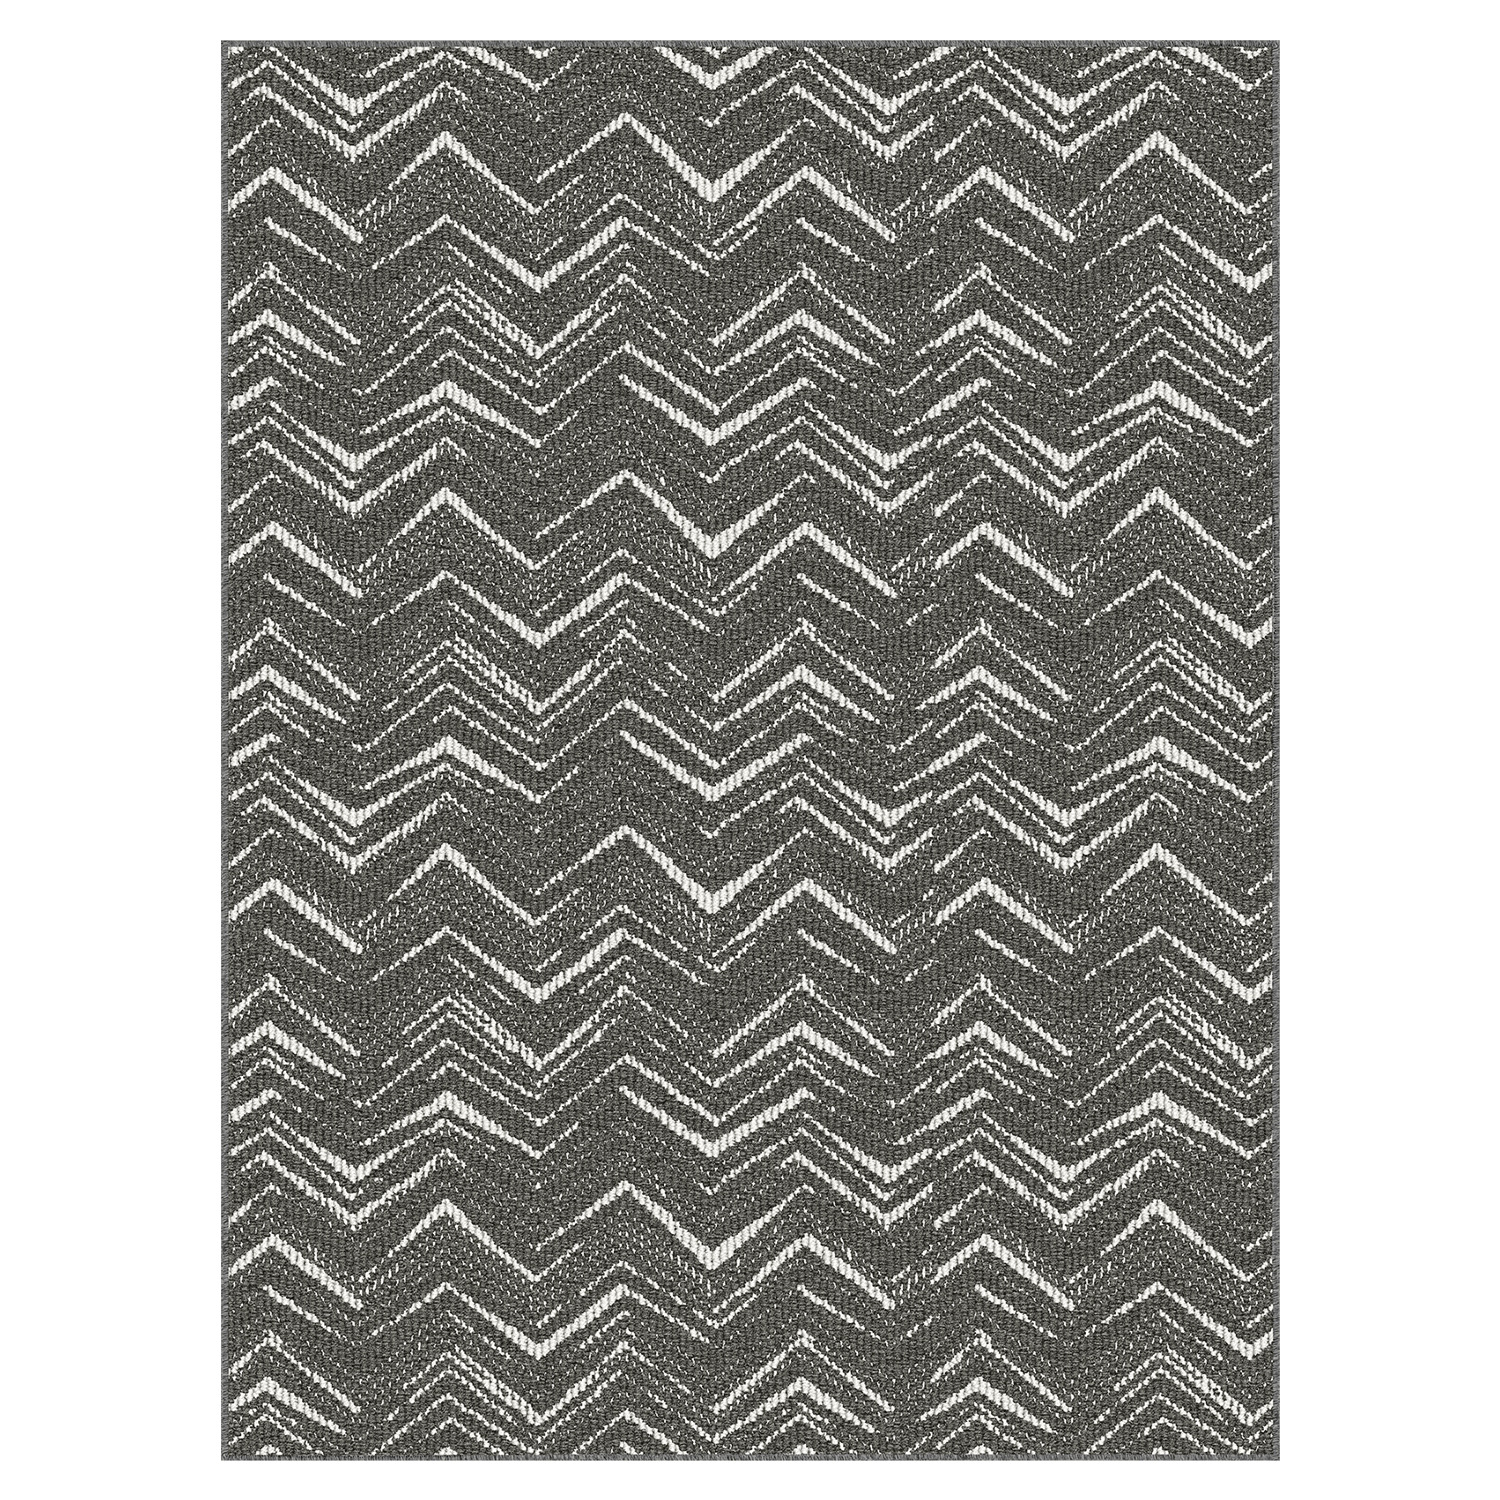 TOULOUSE Collection - Dark grey Comfygrip rug, 3'x4'